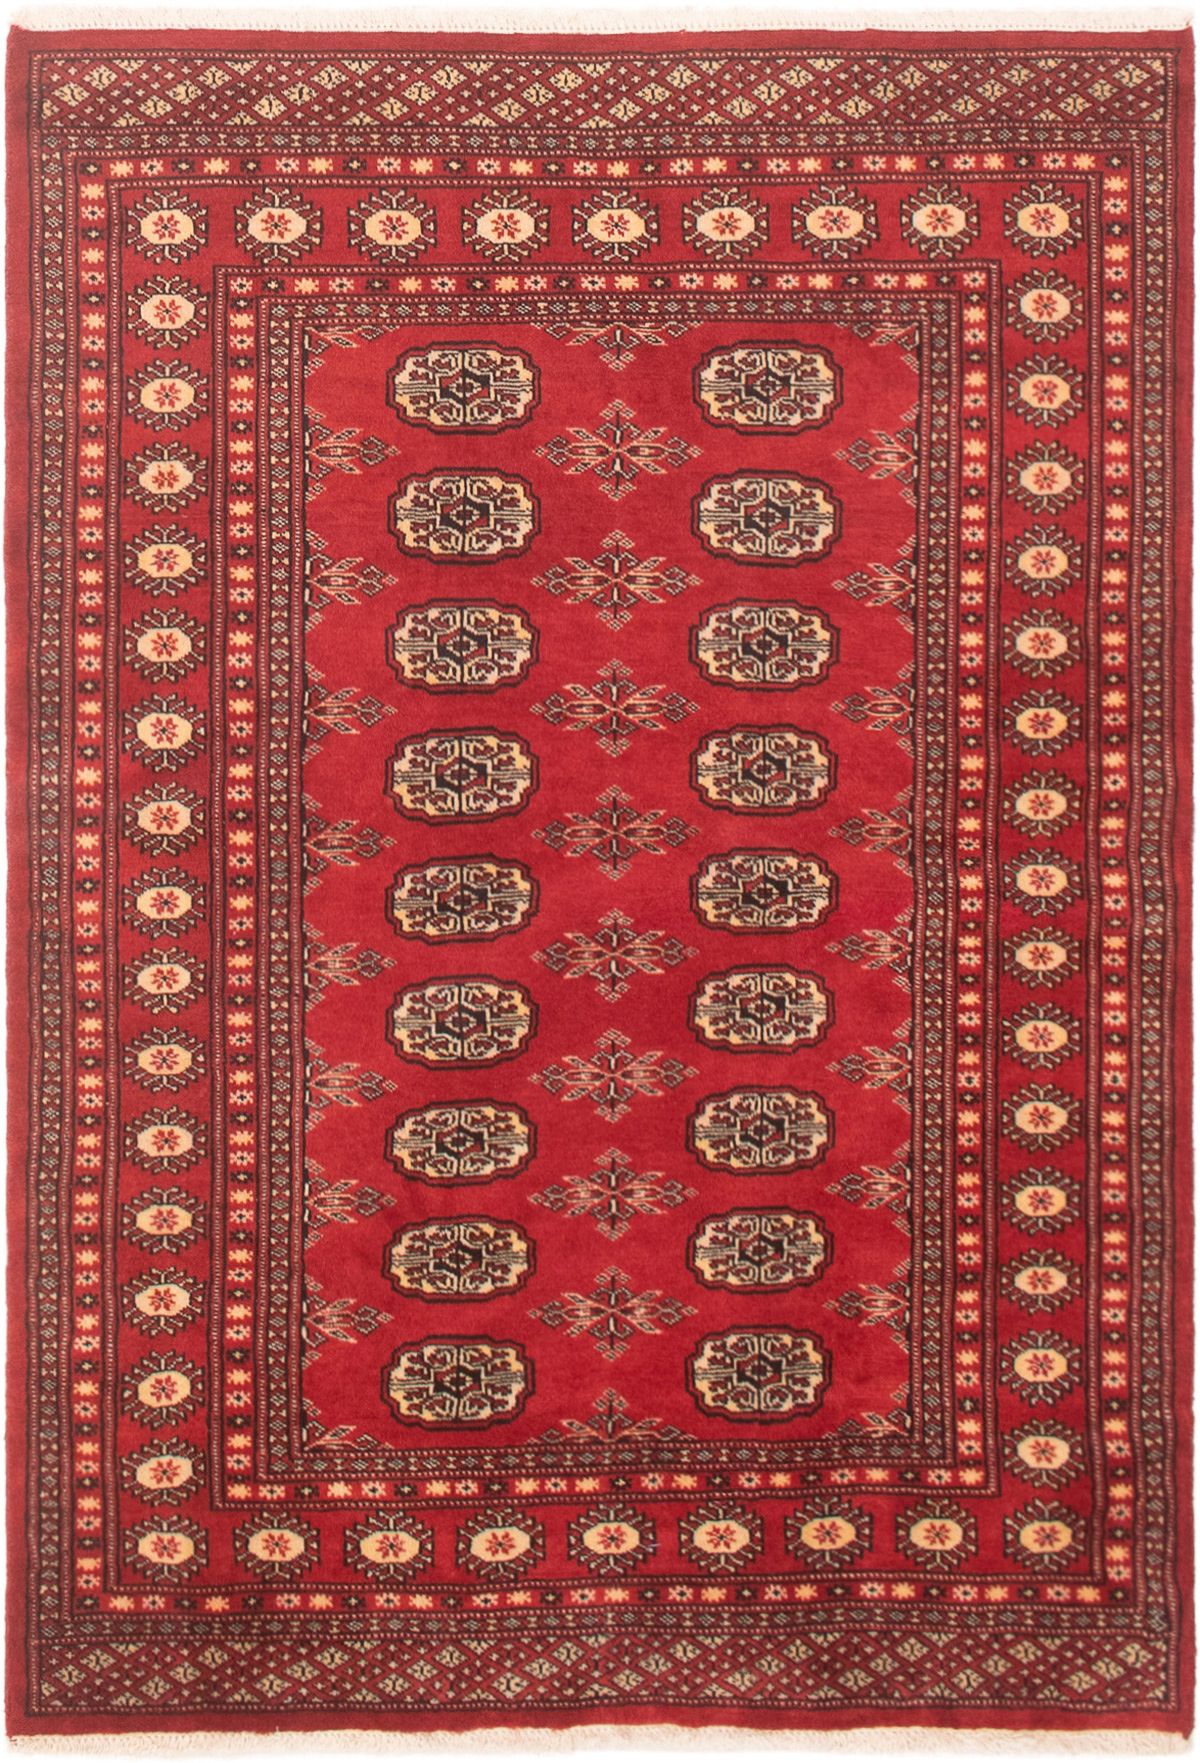 Hand-knotted Finest Peshawar Bokhara Red Wool Rug 4'0" x 5'9"  Size: 4'0" x 5'9"  